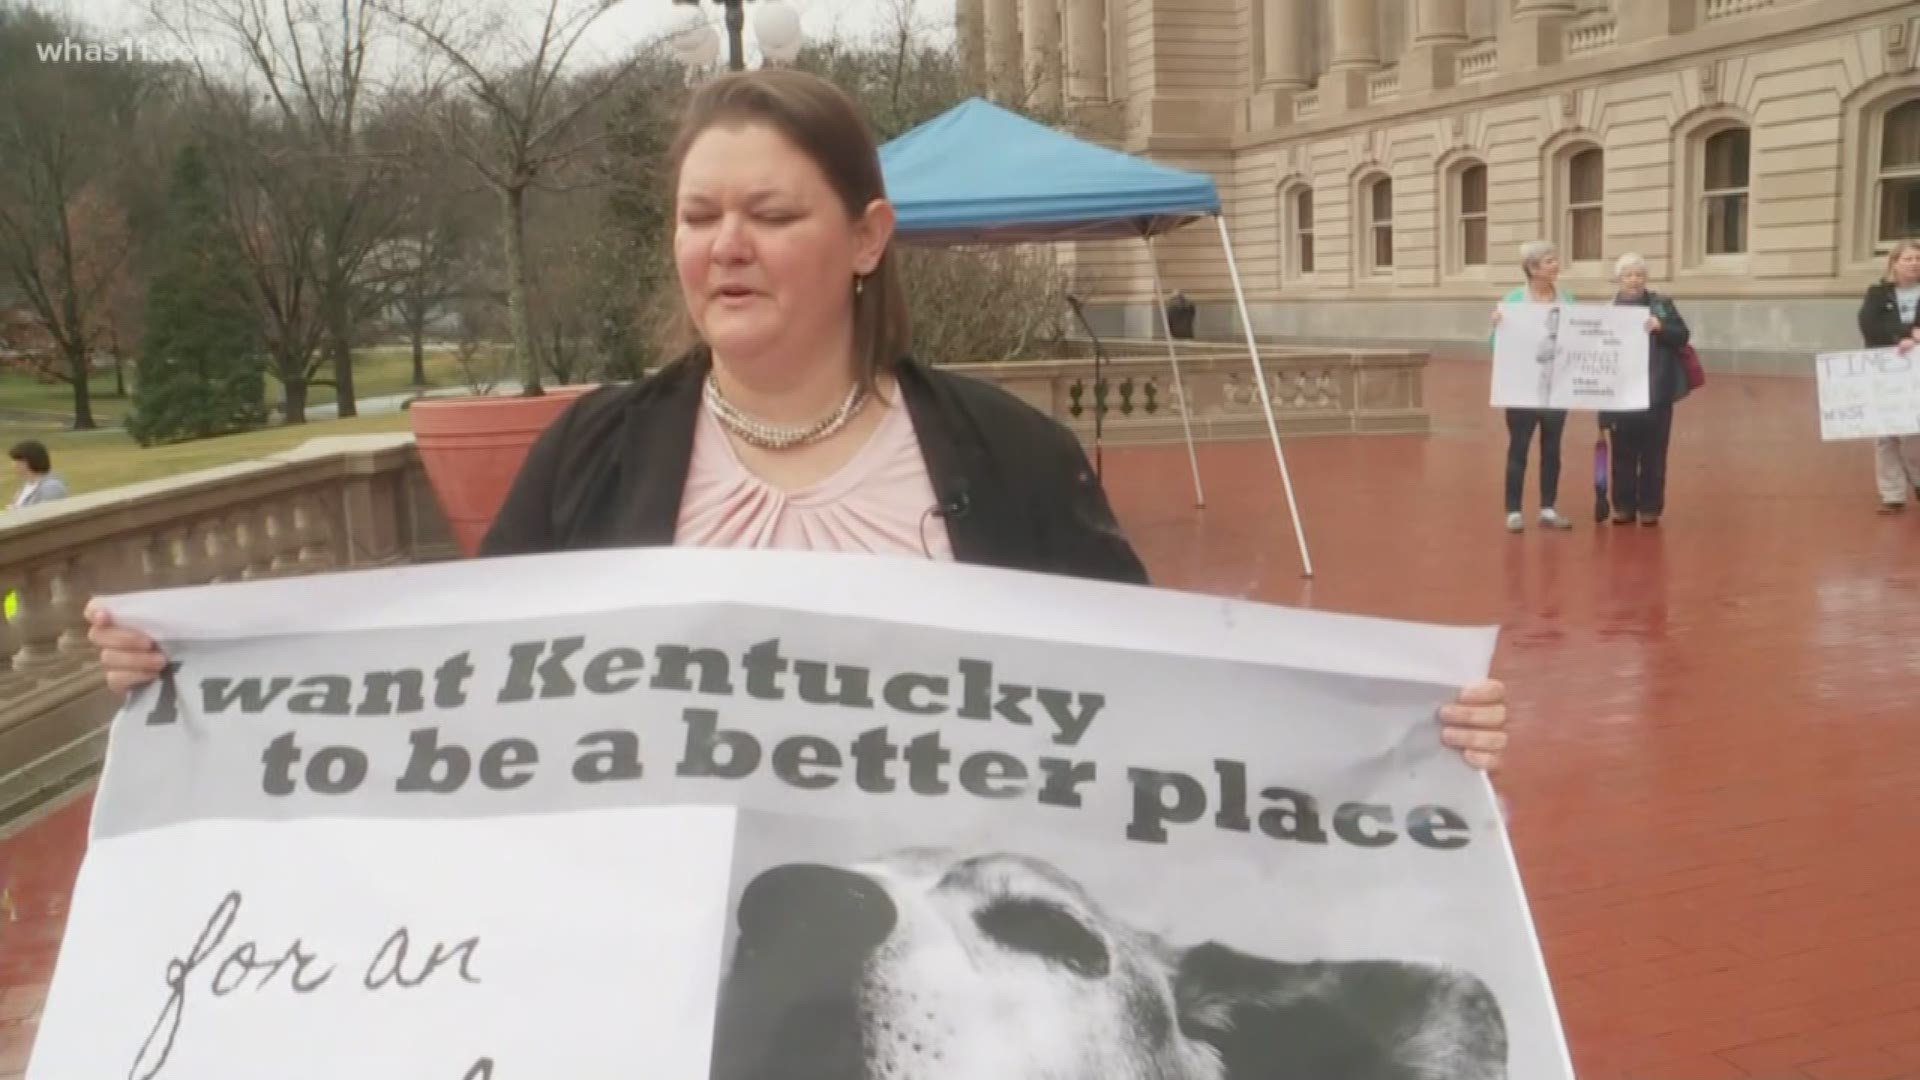 A little bit of rain didn't stop animal advocates from rallying in Frankfort on February 6.